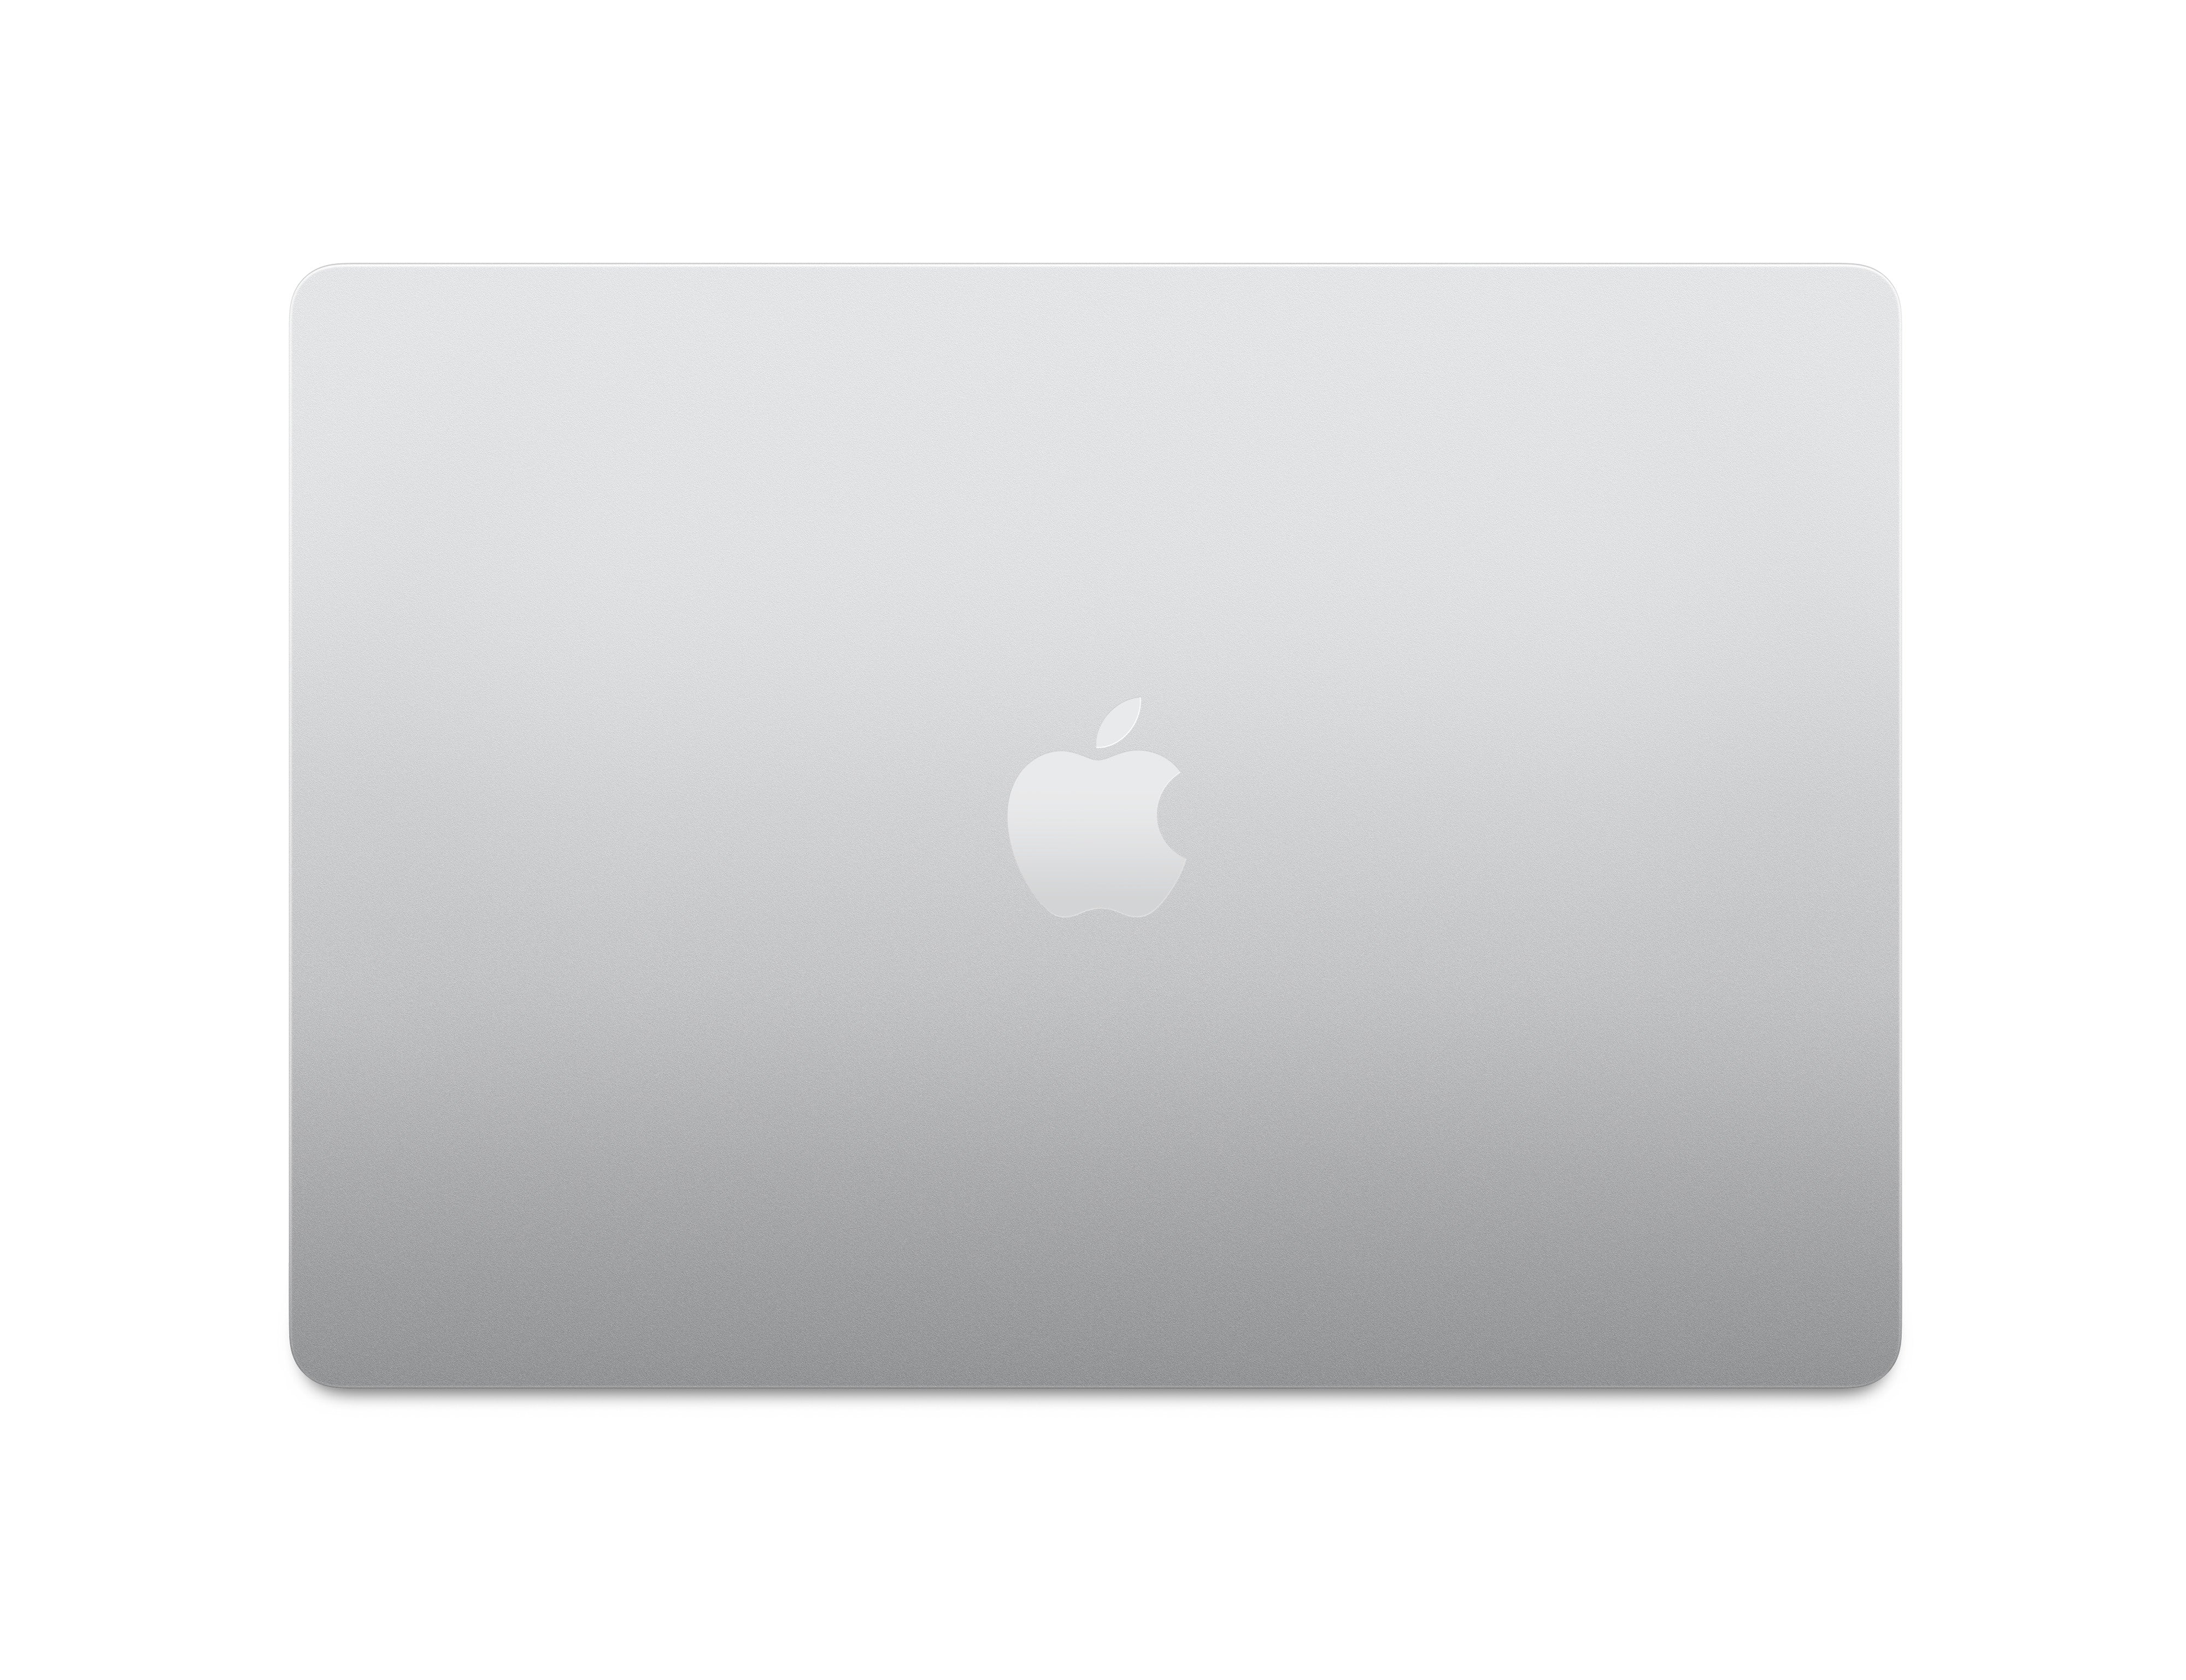 MacBook Air 15” with M2 Chip